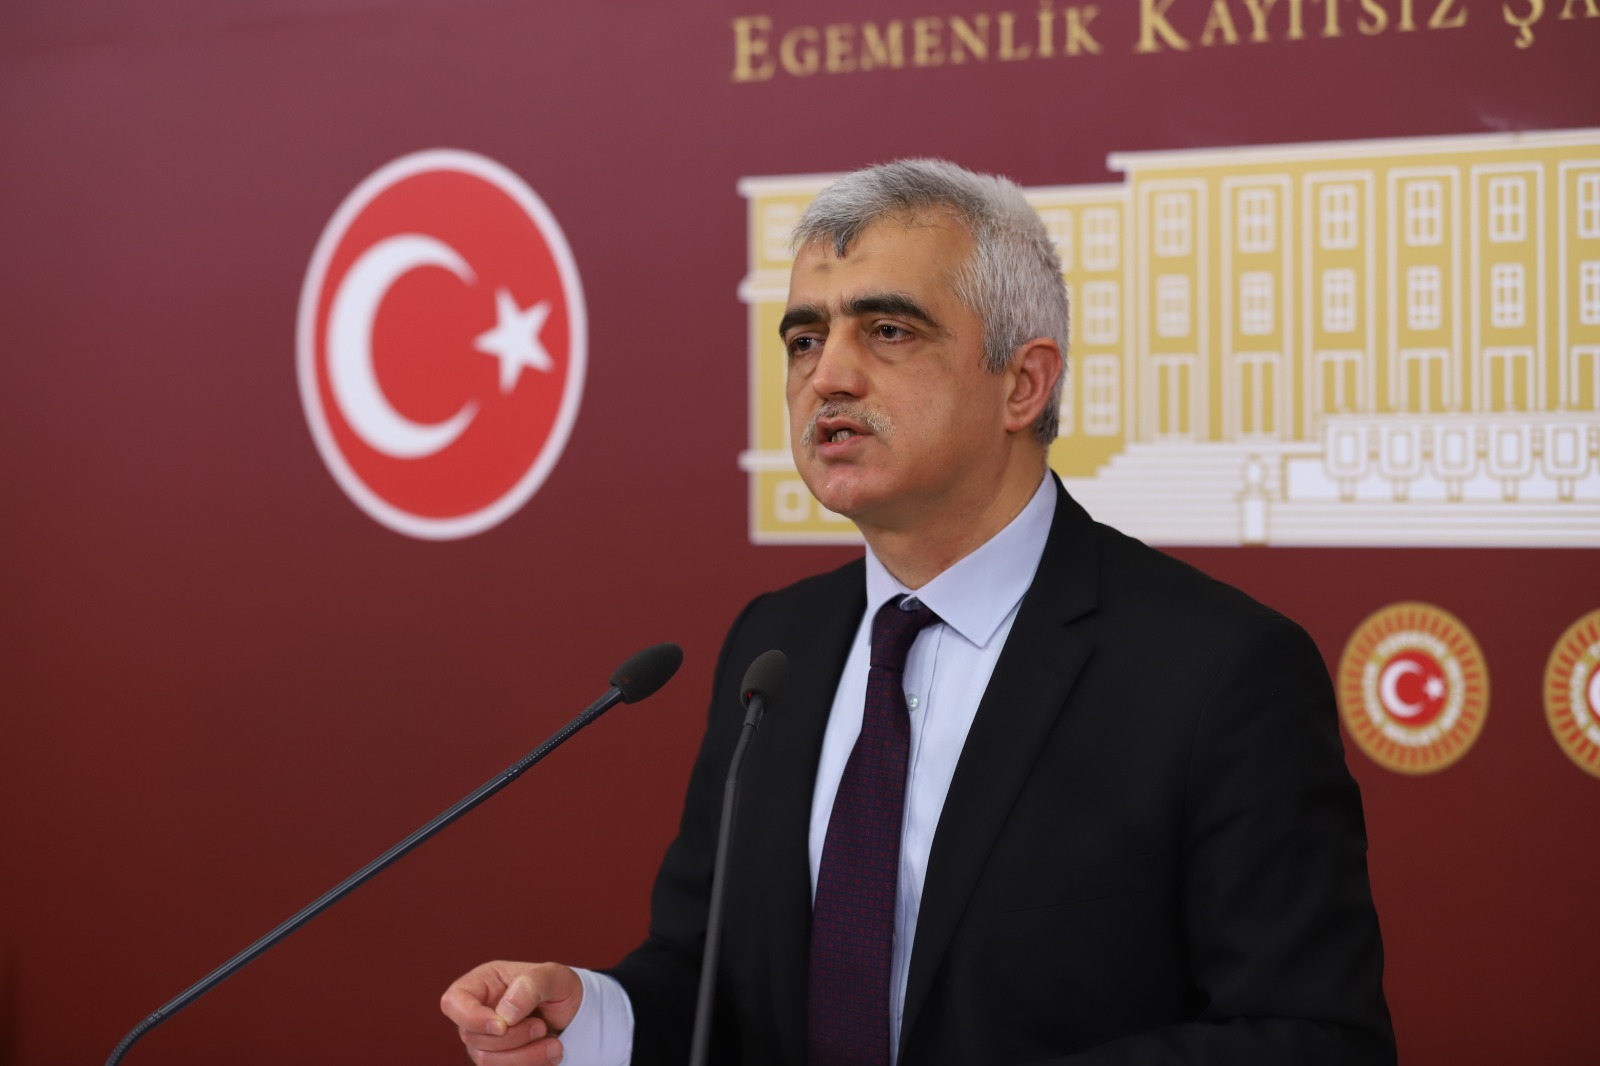 Opposition member of parliament, Ömer Faruk Gergerlioğlu, from the Peoples’ Democratic Party (HDP) speaking in parliament, May 2, 2019 